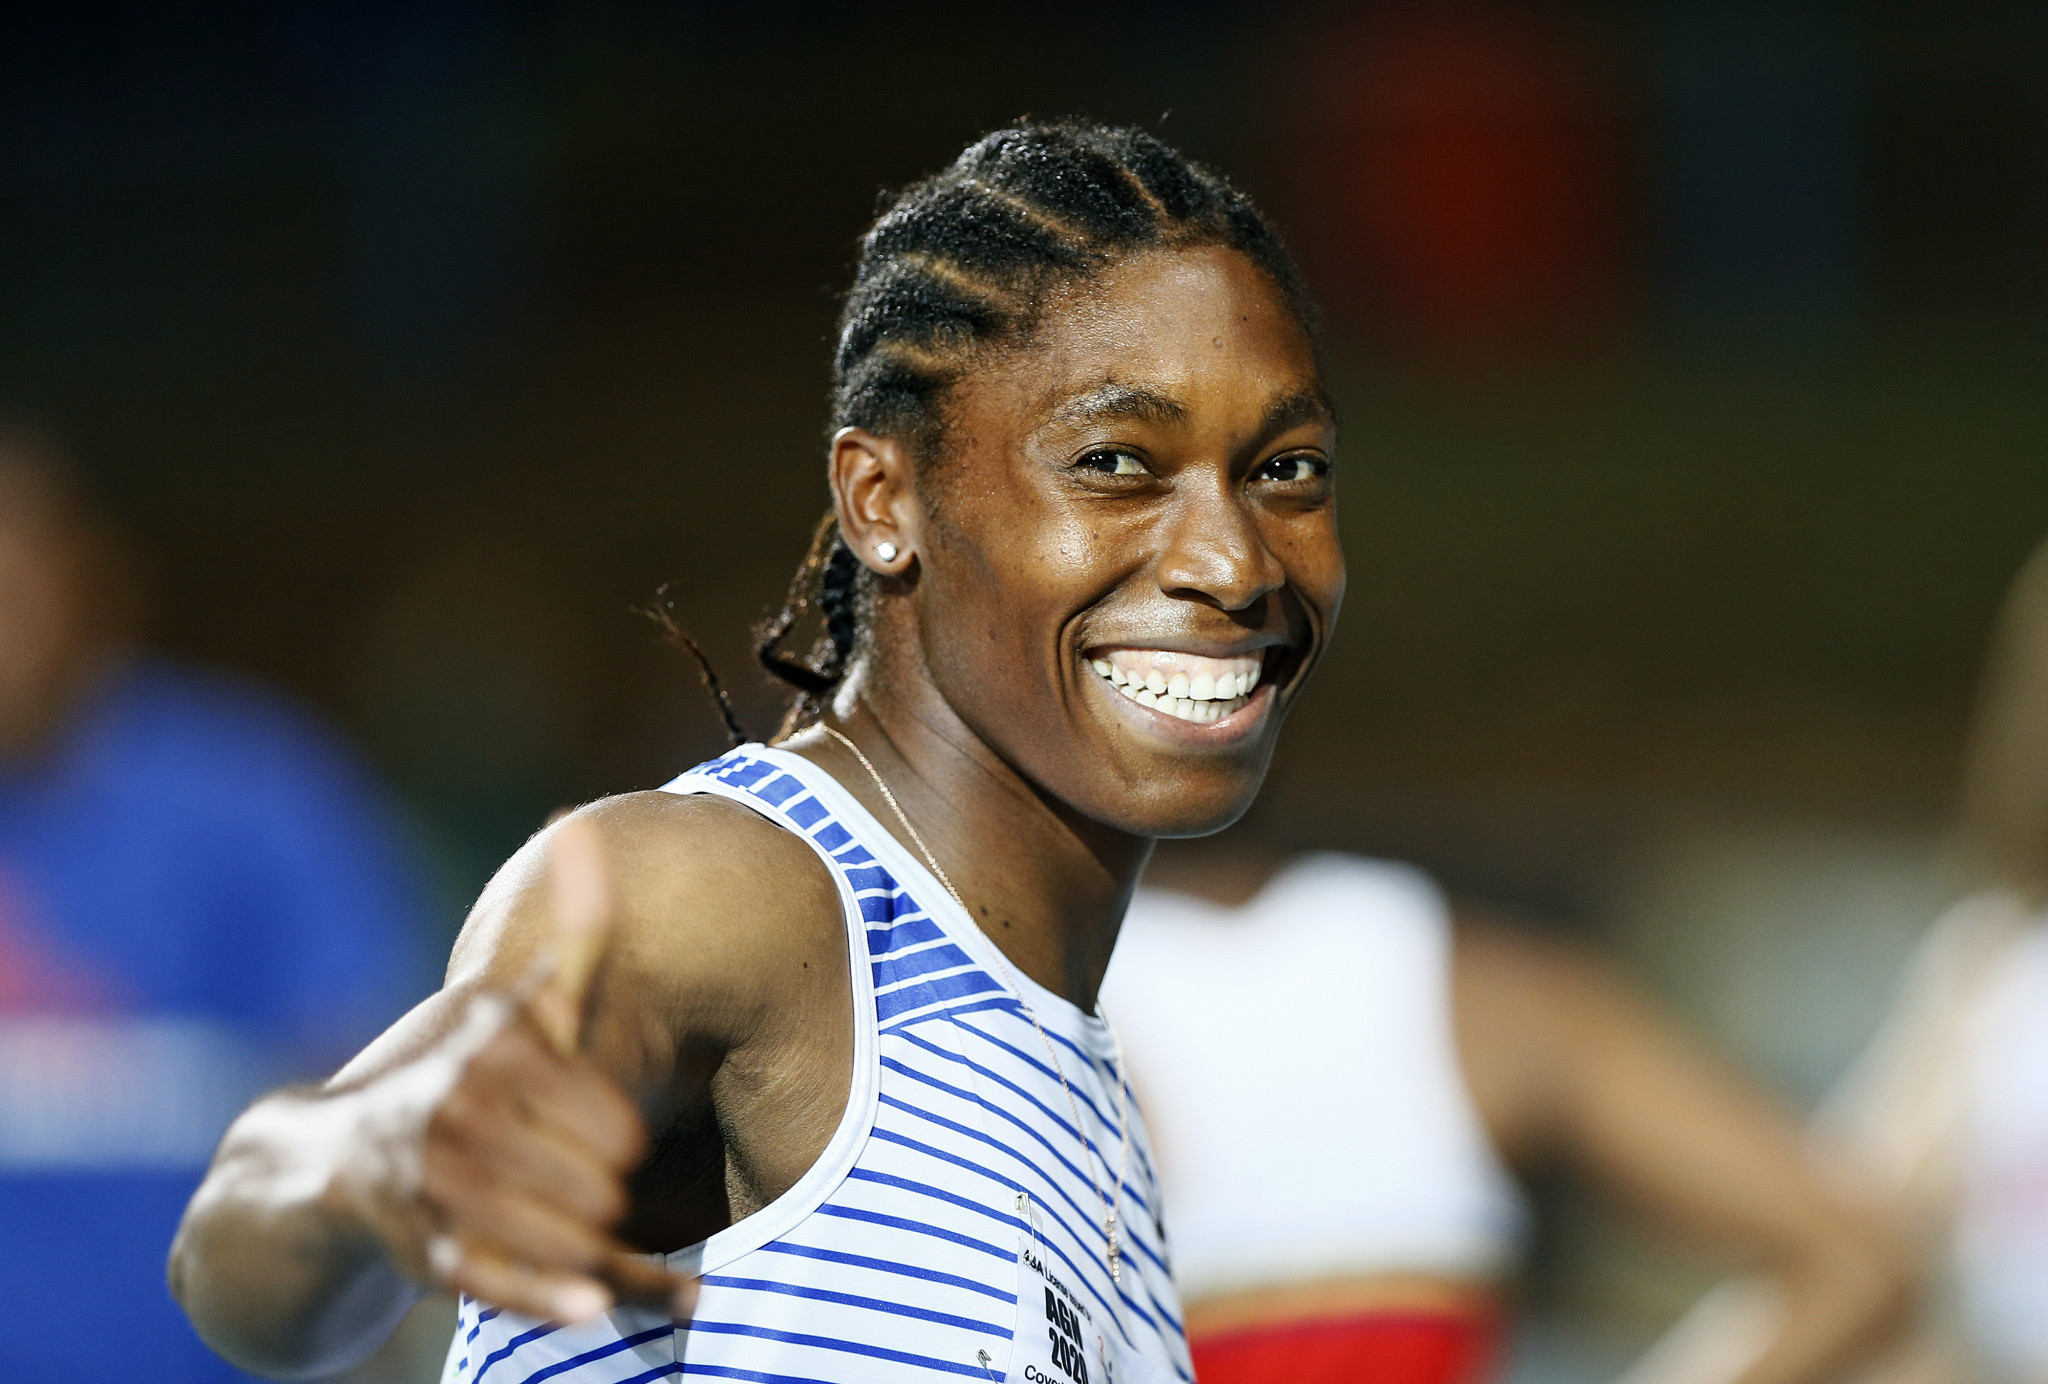 Caster Semenya is challenging World Athletics' controversial rules at the European Court of Human Rights ©Getty Images